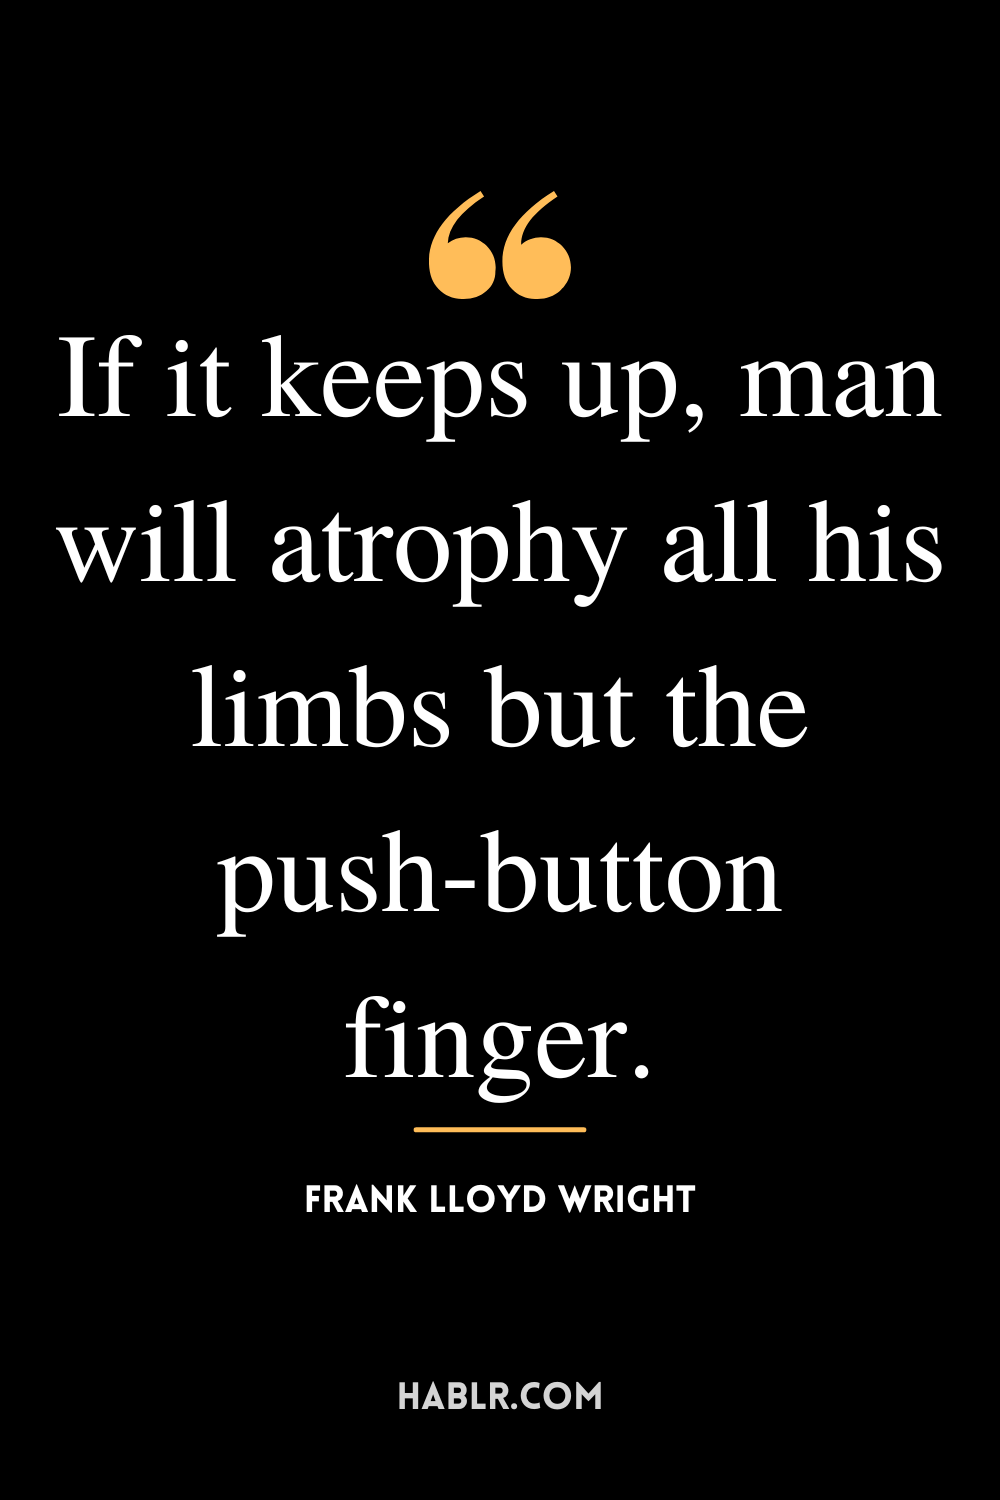 "If it keeps up, man will atrophy all his limbs but the push-button finger." -Frank Lloyd Wright